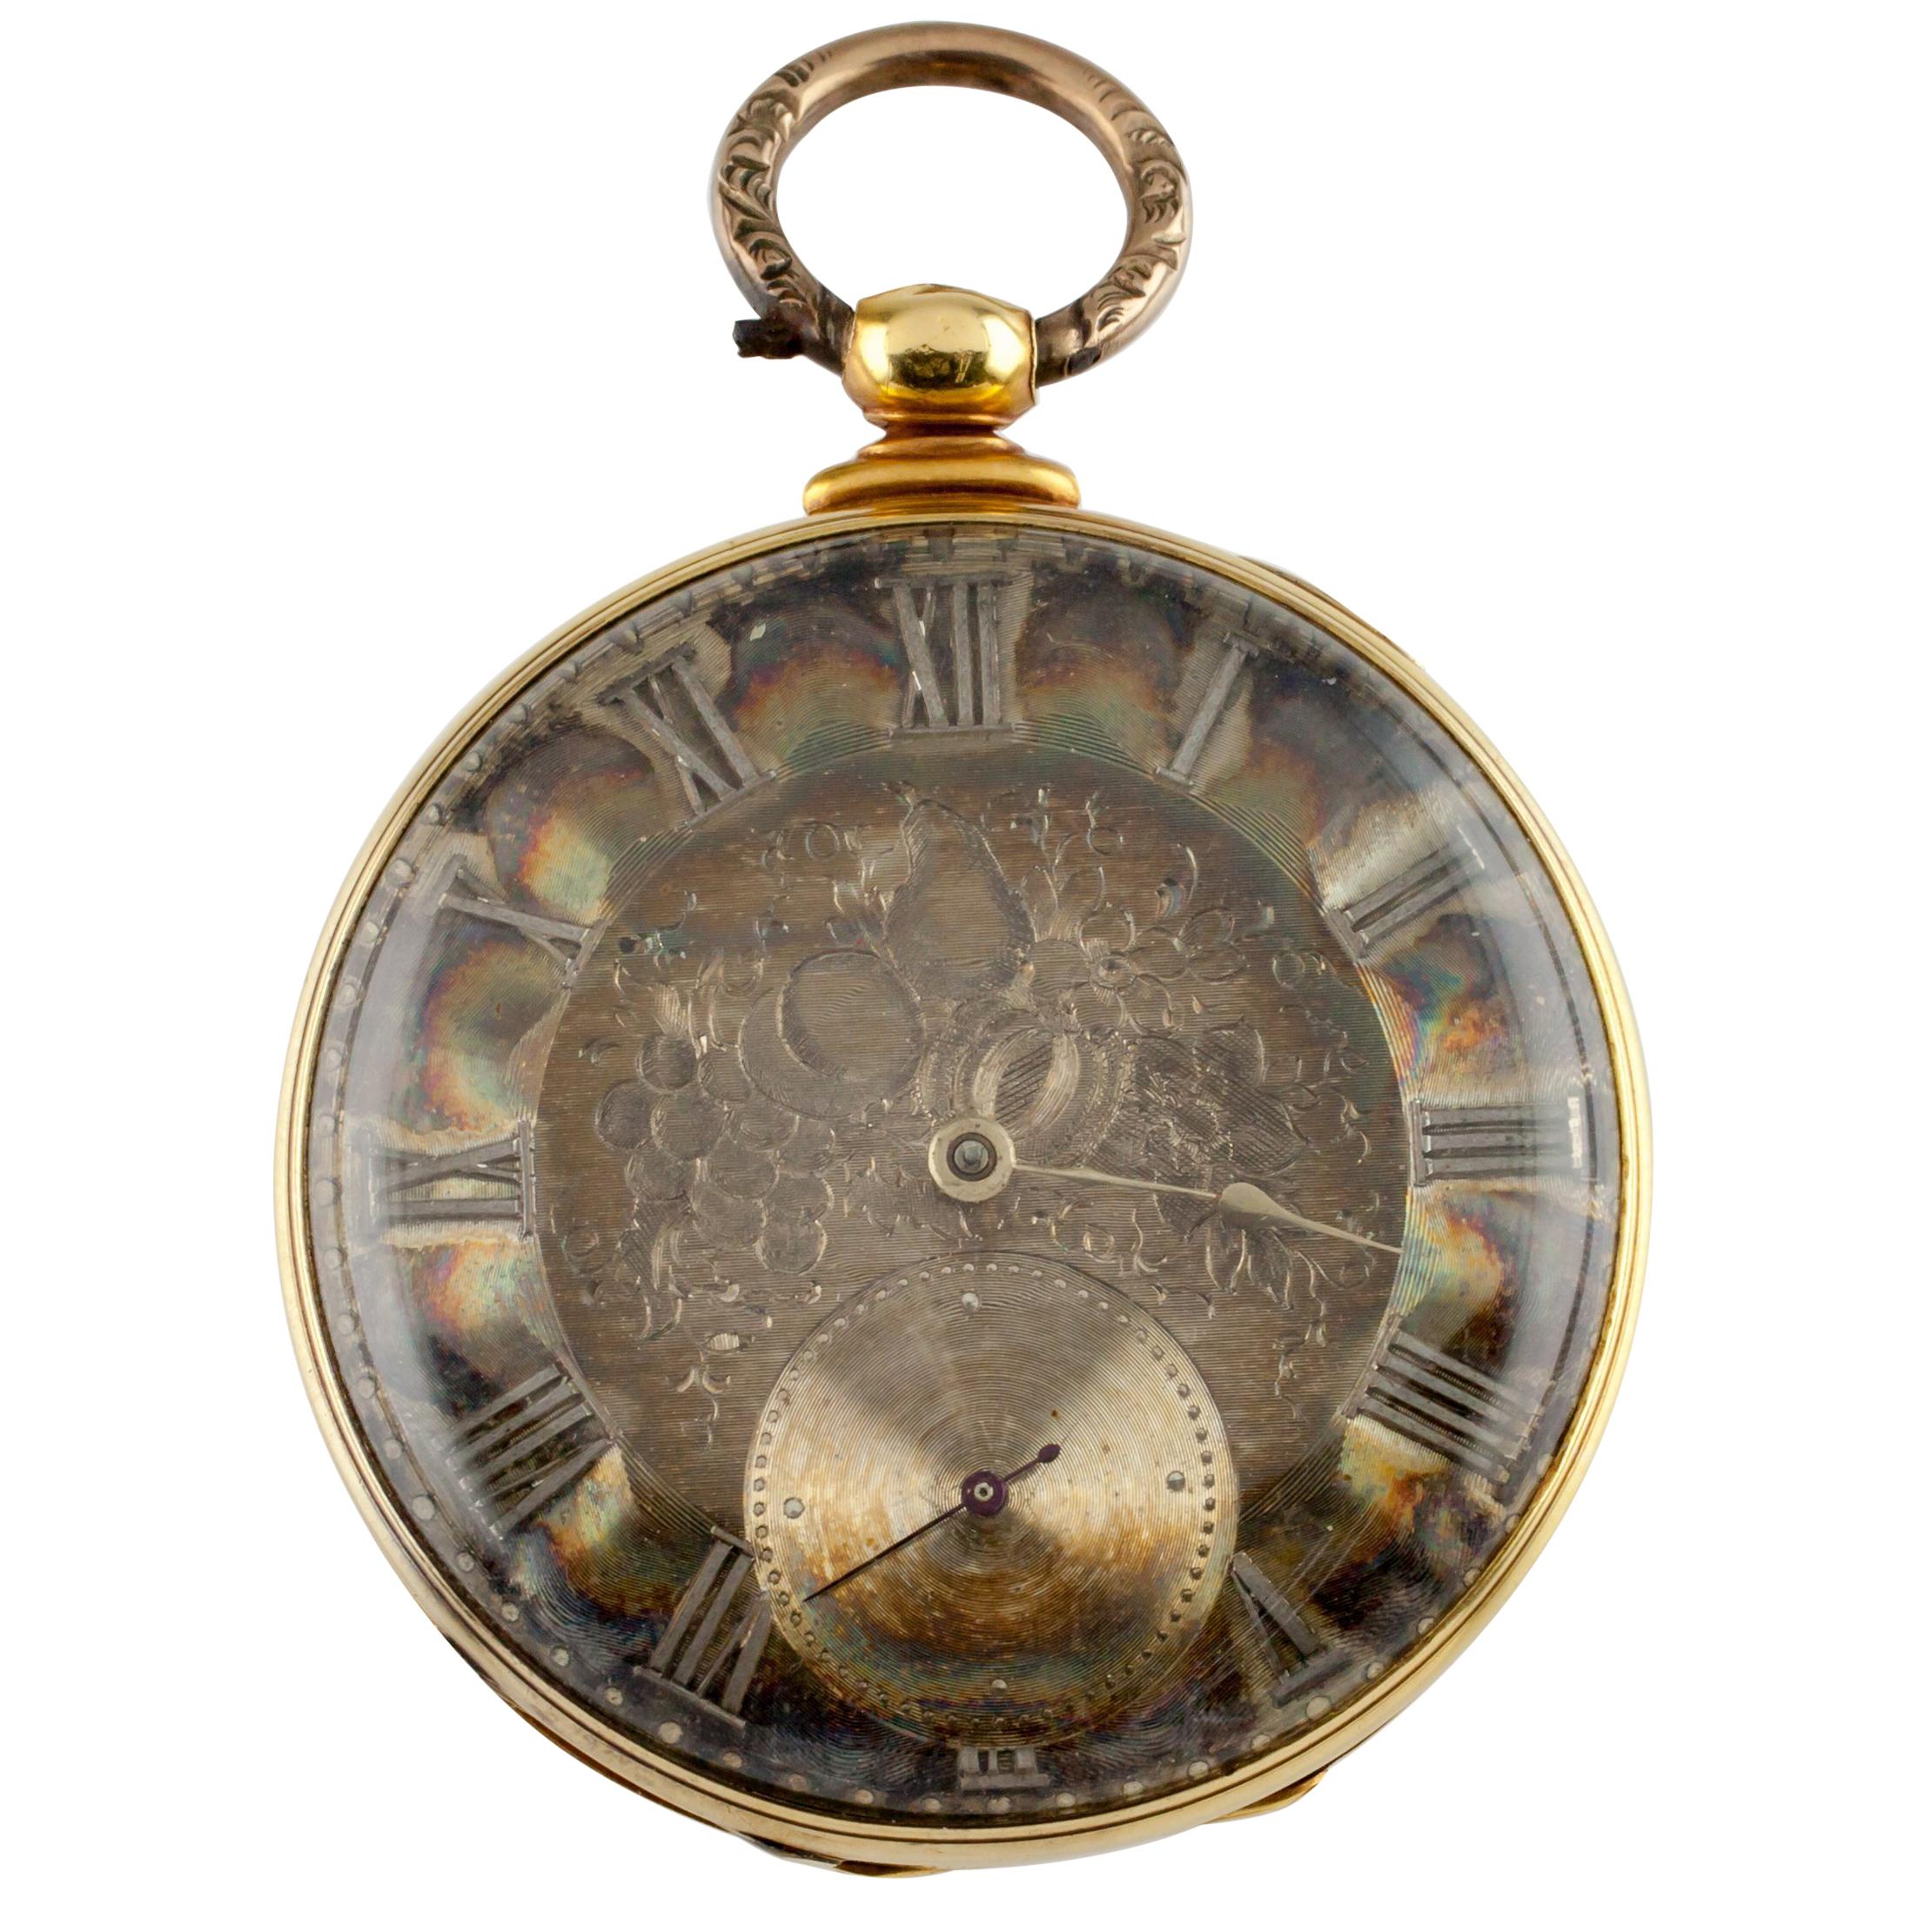 Thomas Cooper London Key Operated 18 Karat Yellow Gold Pocket Watch 13 Jewels For Sale